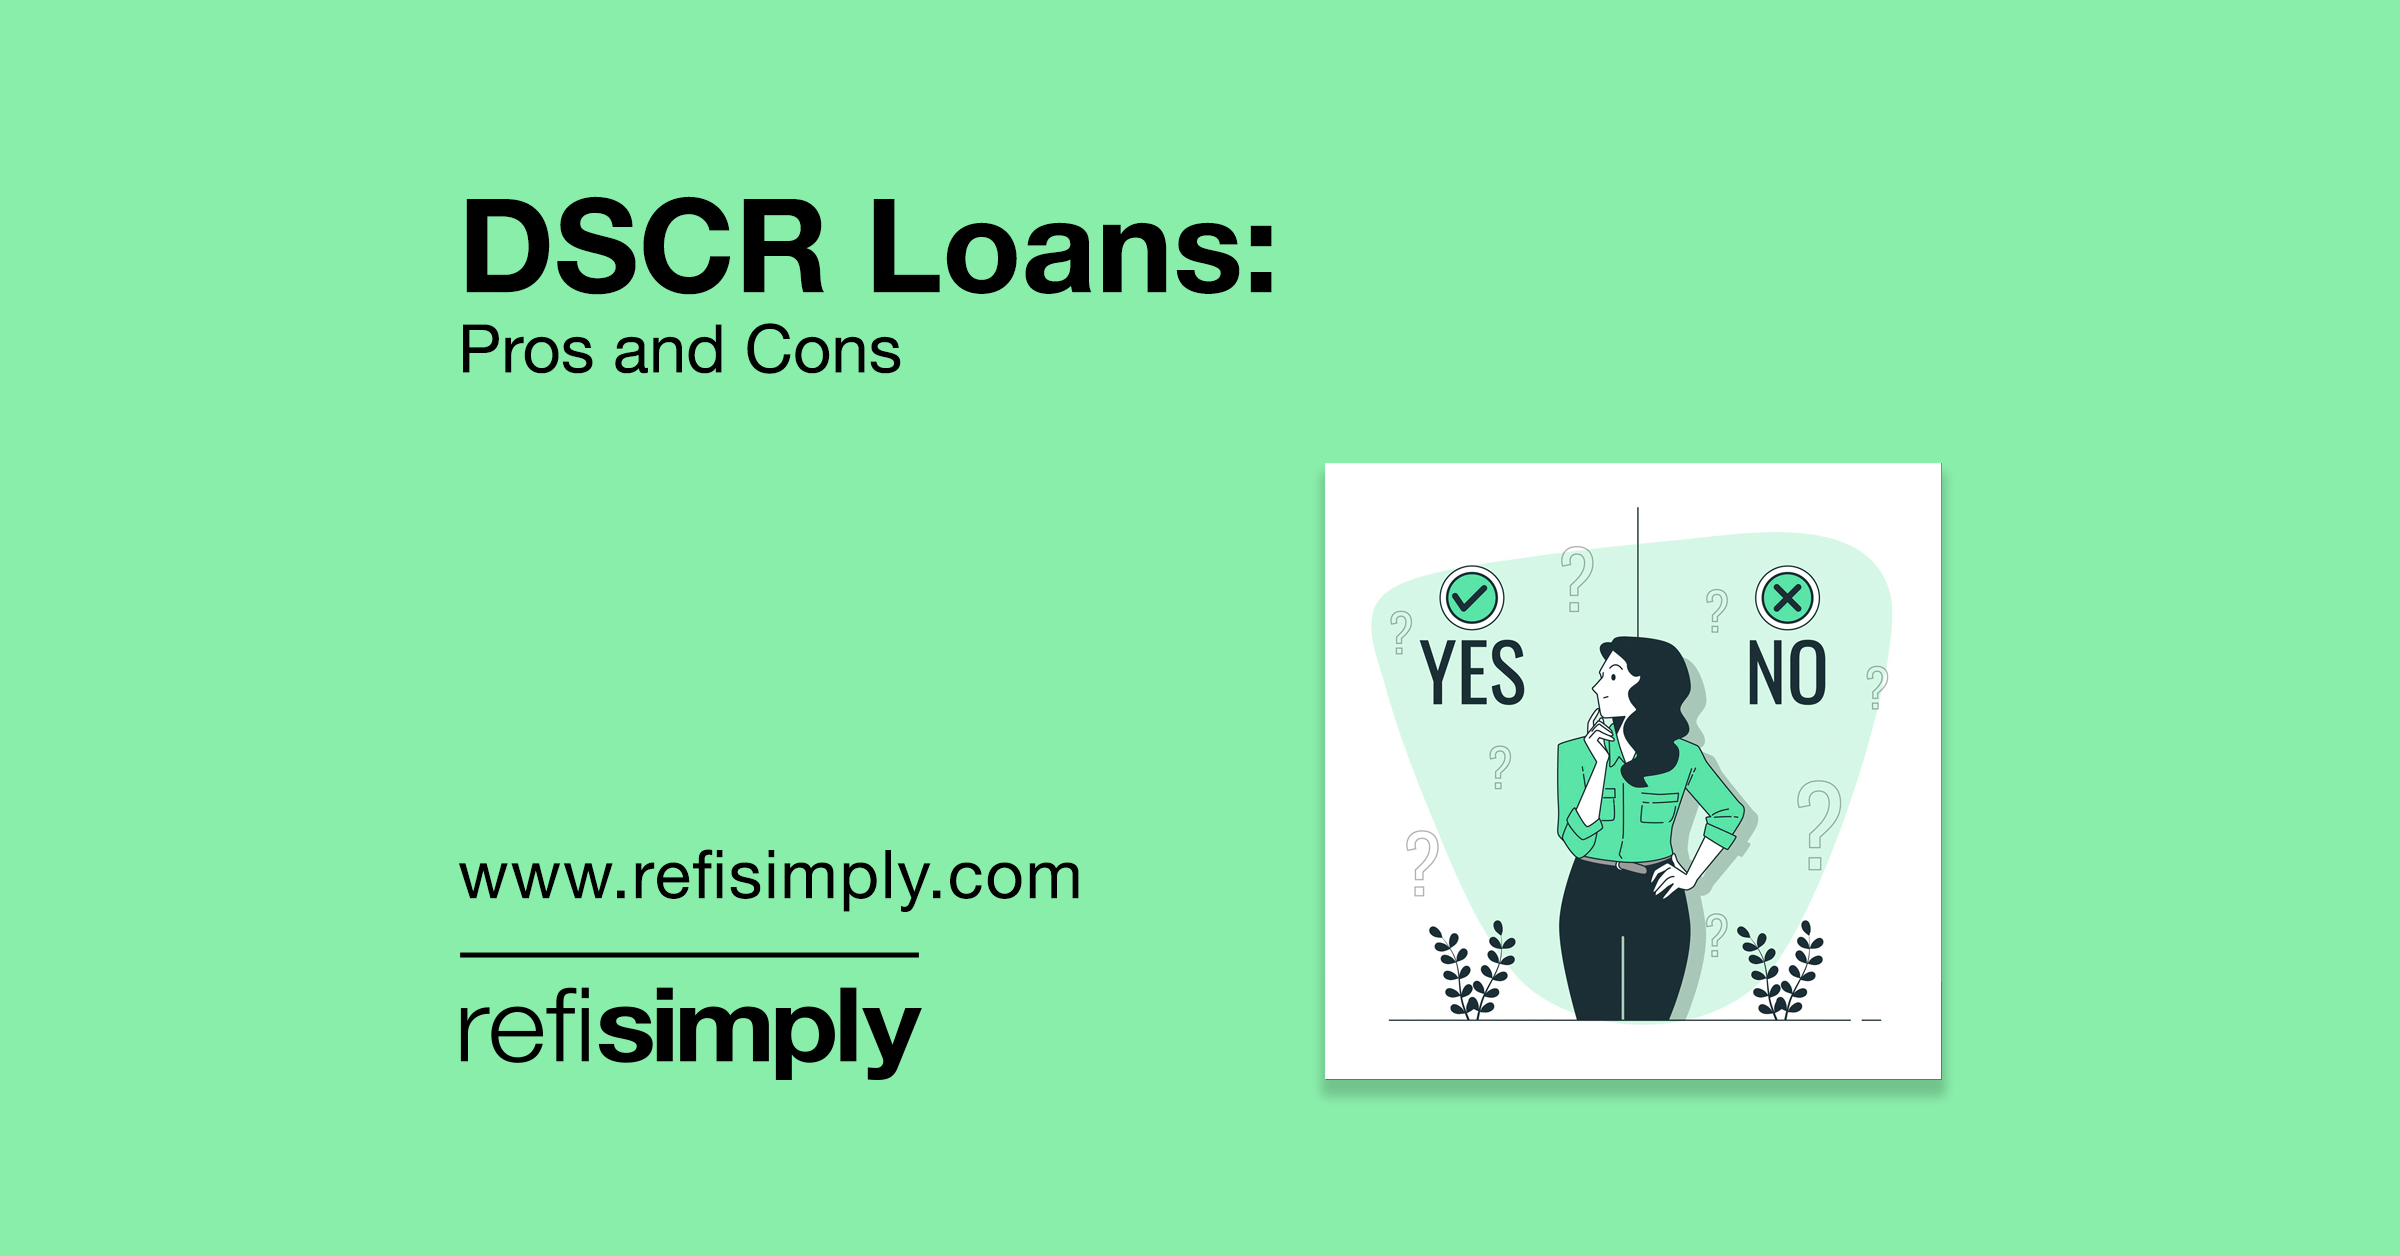 DSCR Loans Pros and Cons